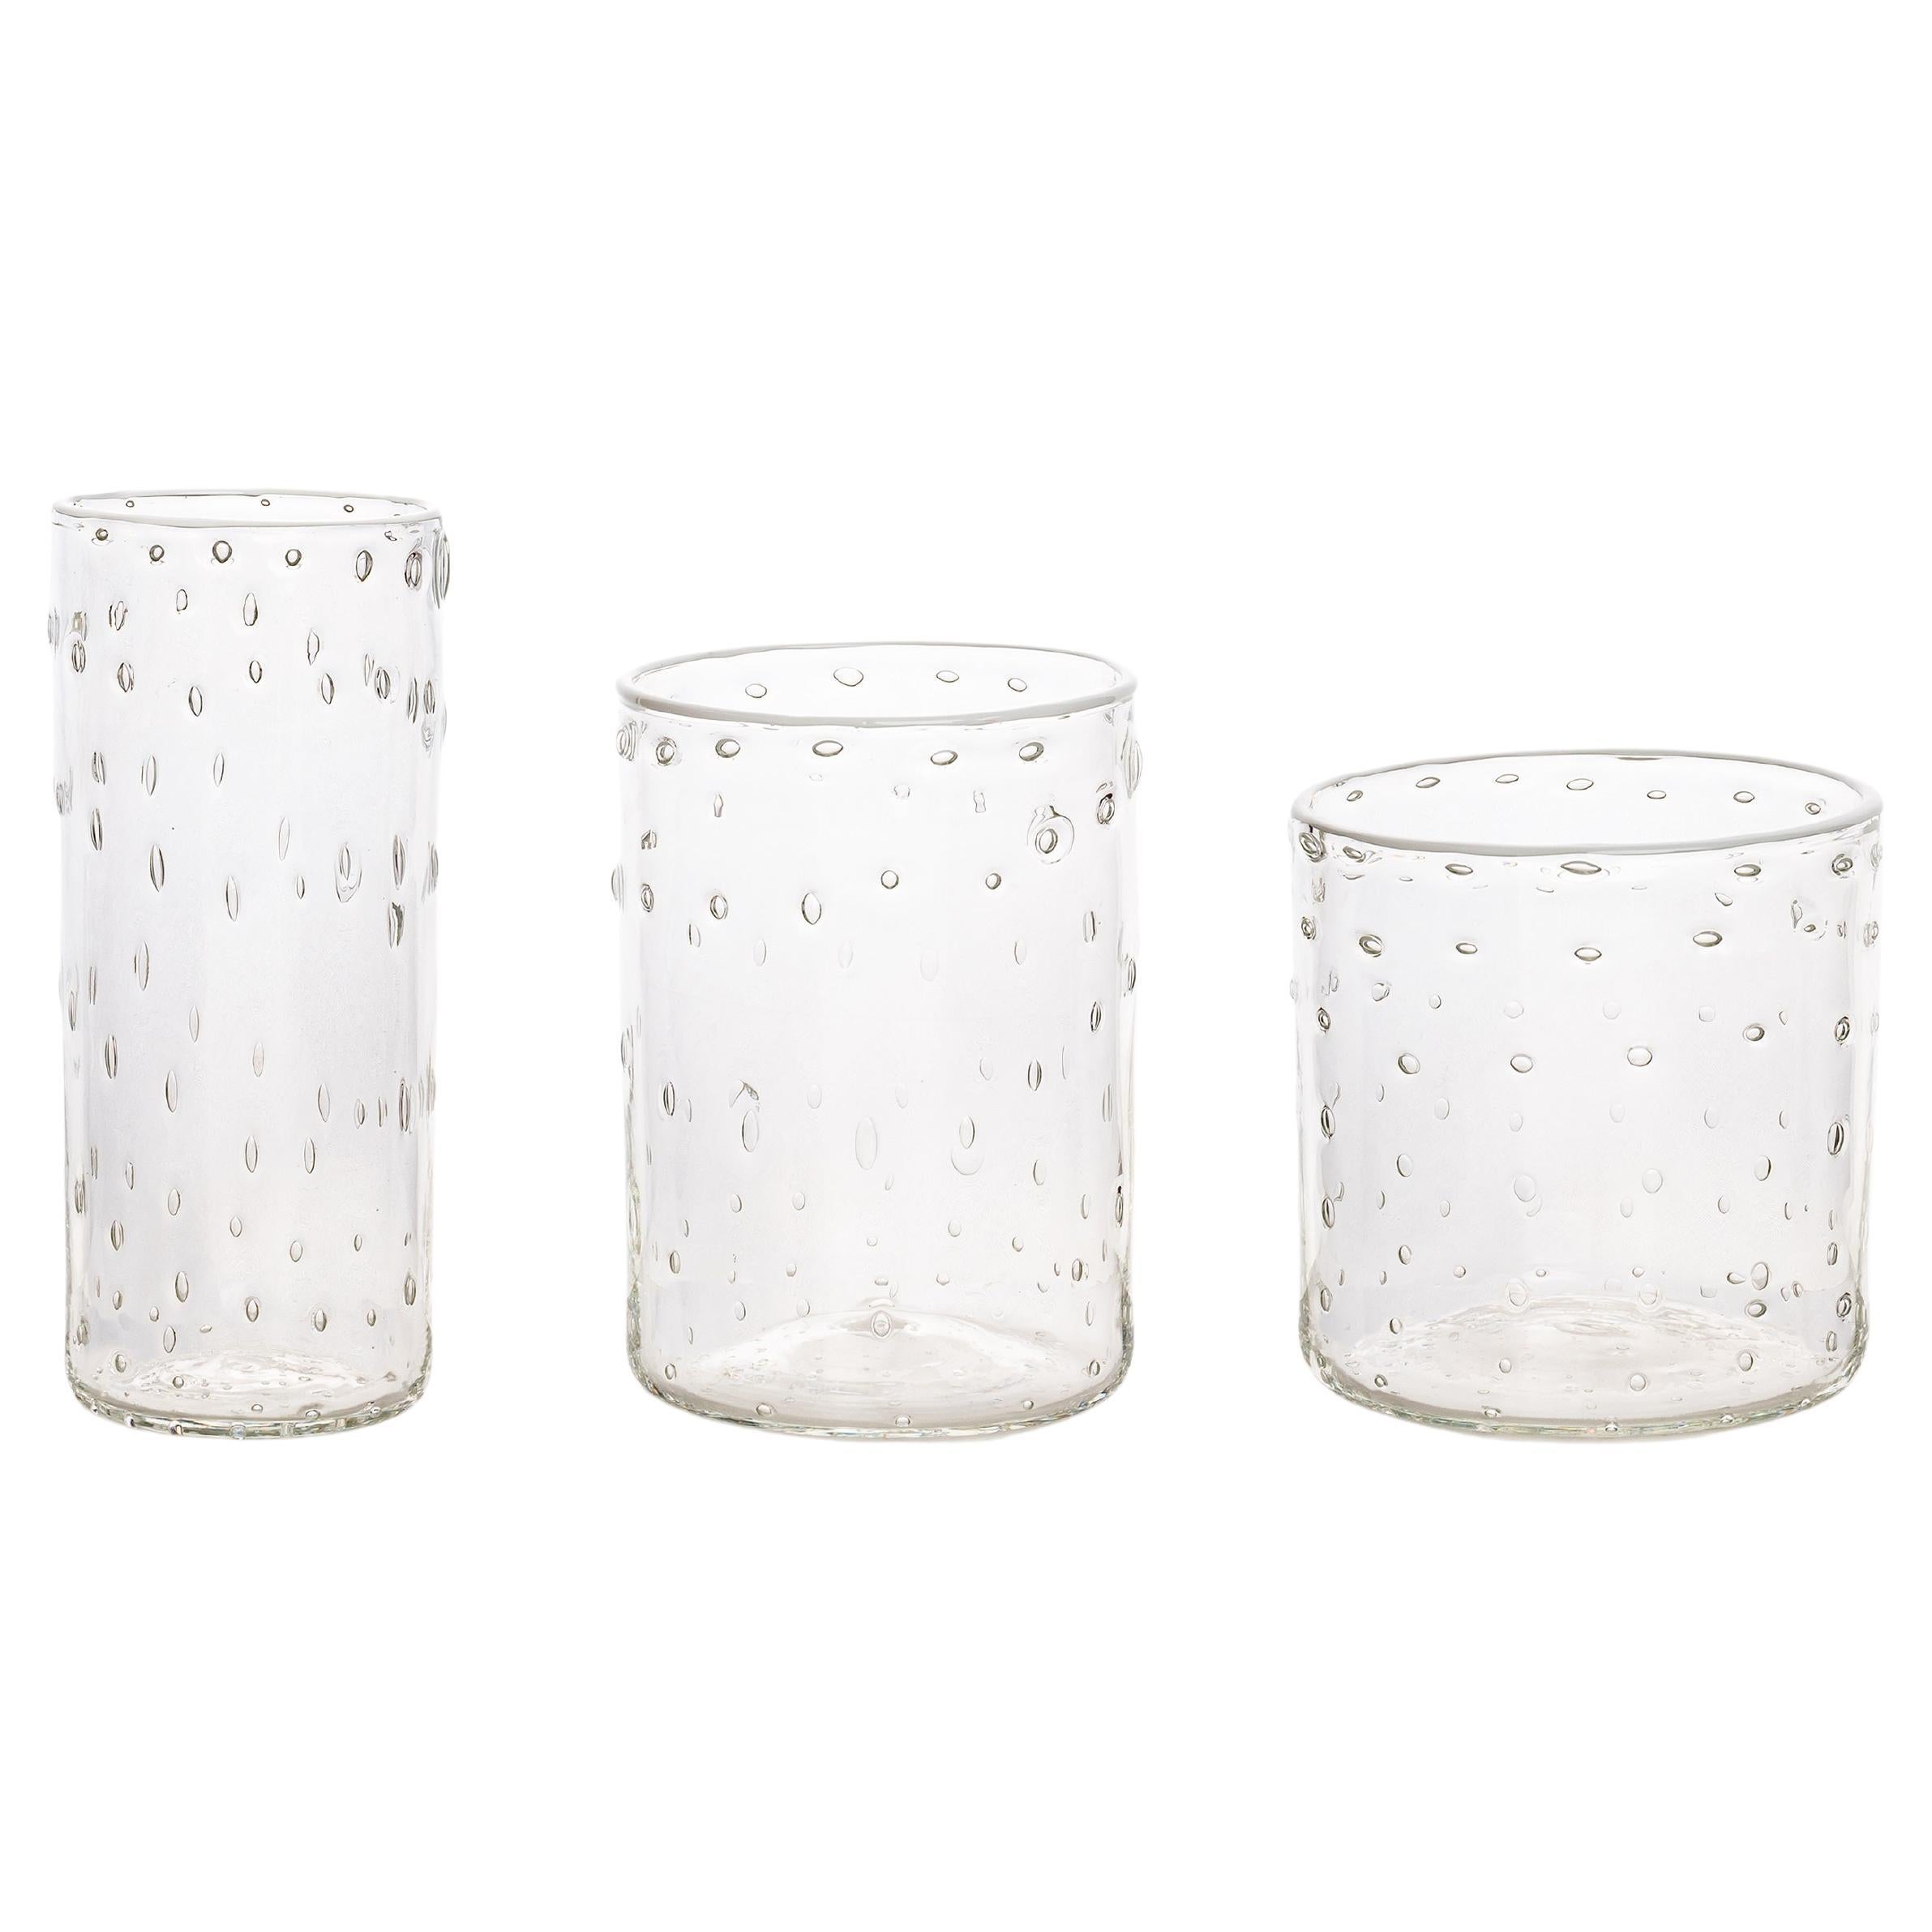 https://a.1stdibscdn.com/murano-glass-ultralight-set-of-3-bubble-tumblers-with-white-rim-for-sale/f_88532/f_357022821692005779316/f_35702282_1692005780078_bg_processed.jpg